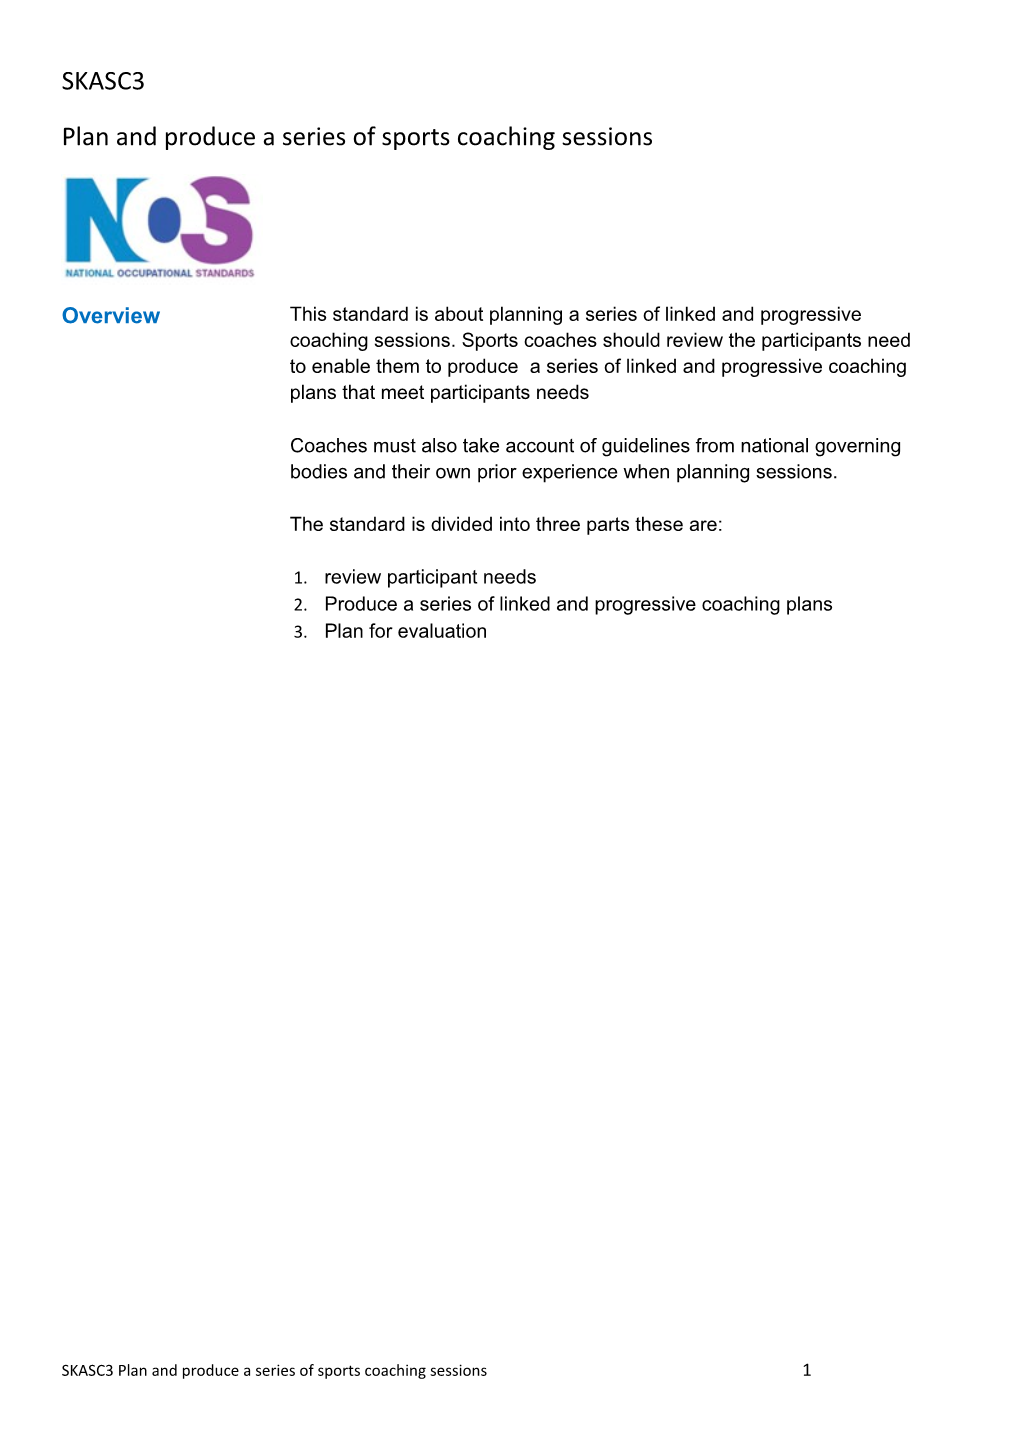 SKASC3 Plan and Produce a Series of Sports Coaching Sessions 8 s1